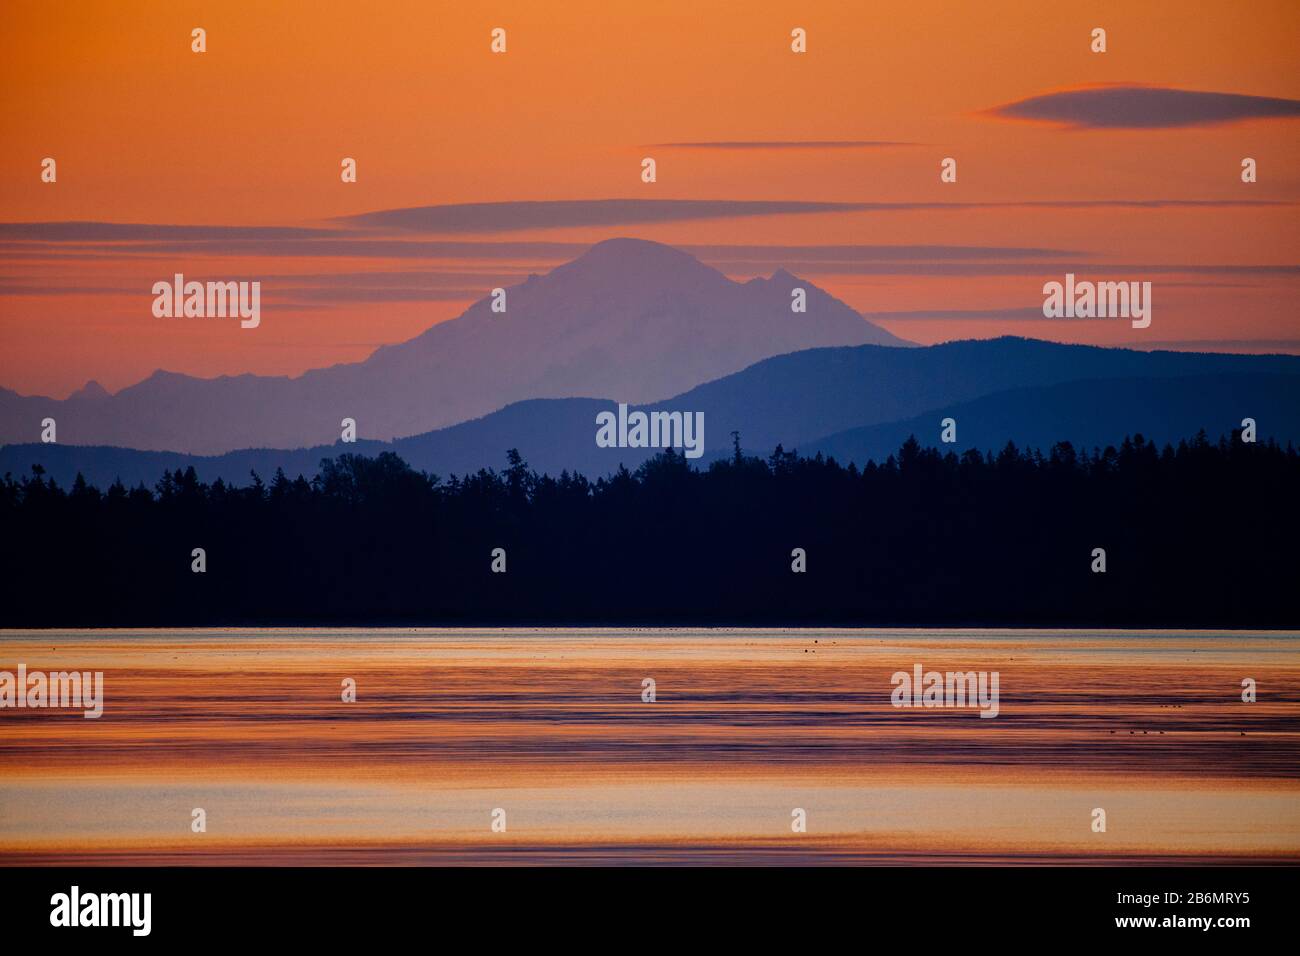 Strait of Juan de Fuca and Mount Baker silhouetted at sunset, Washington State, USA Stock Photo